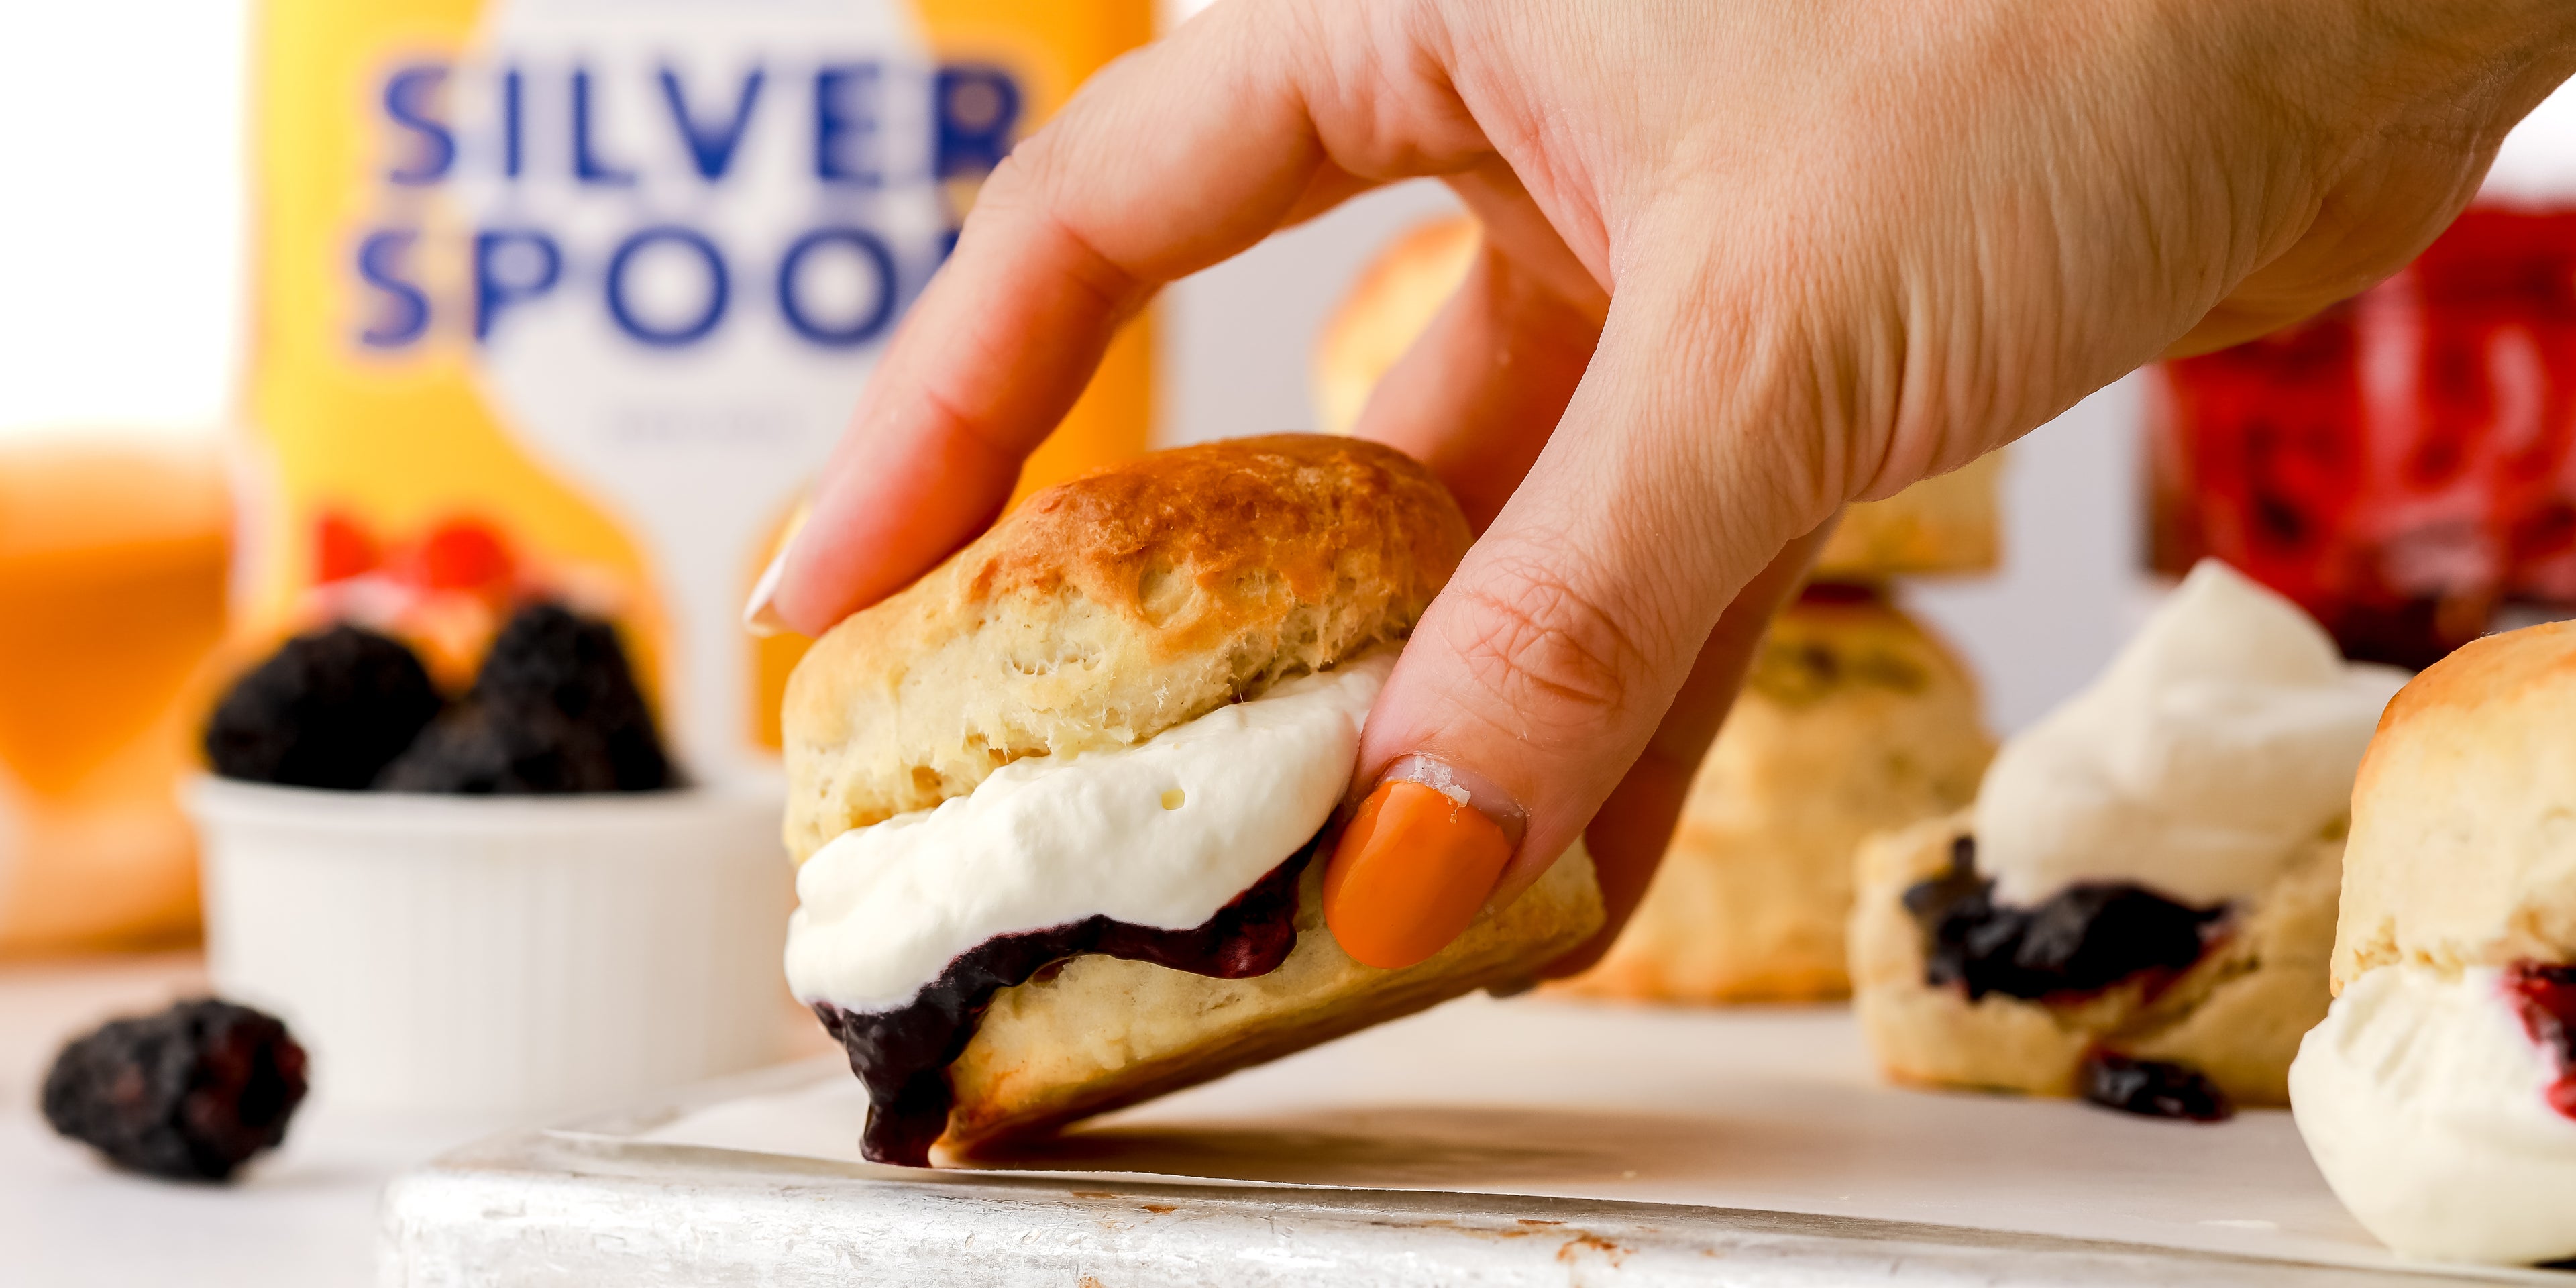 Hand reaching in to grab a scone with jam and cream